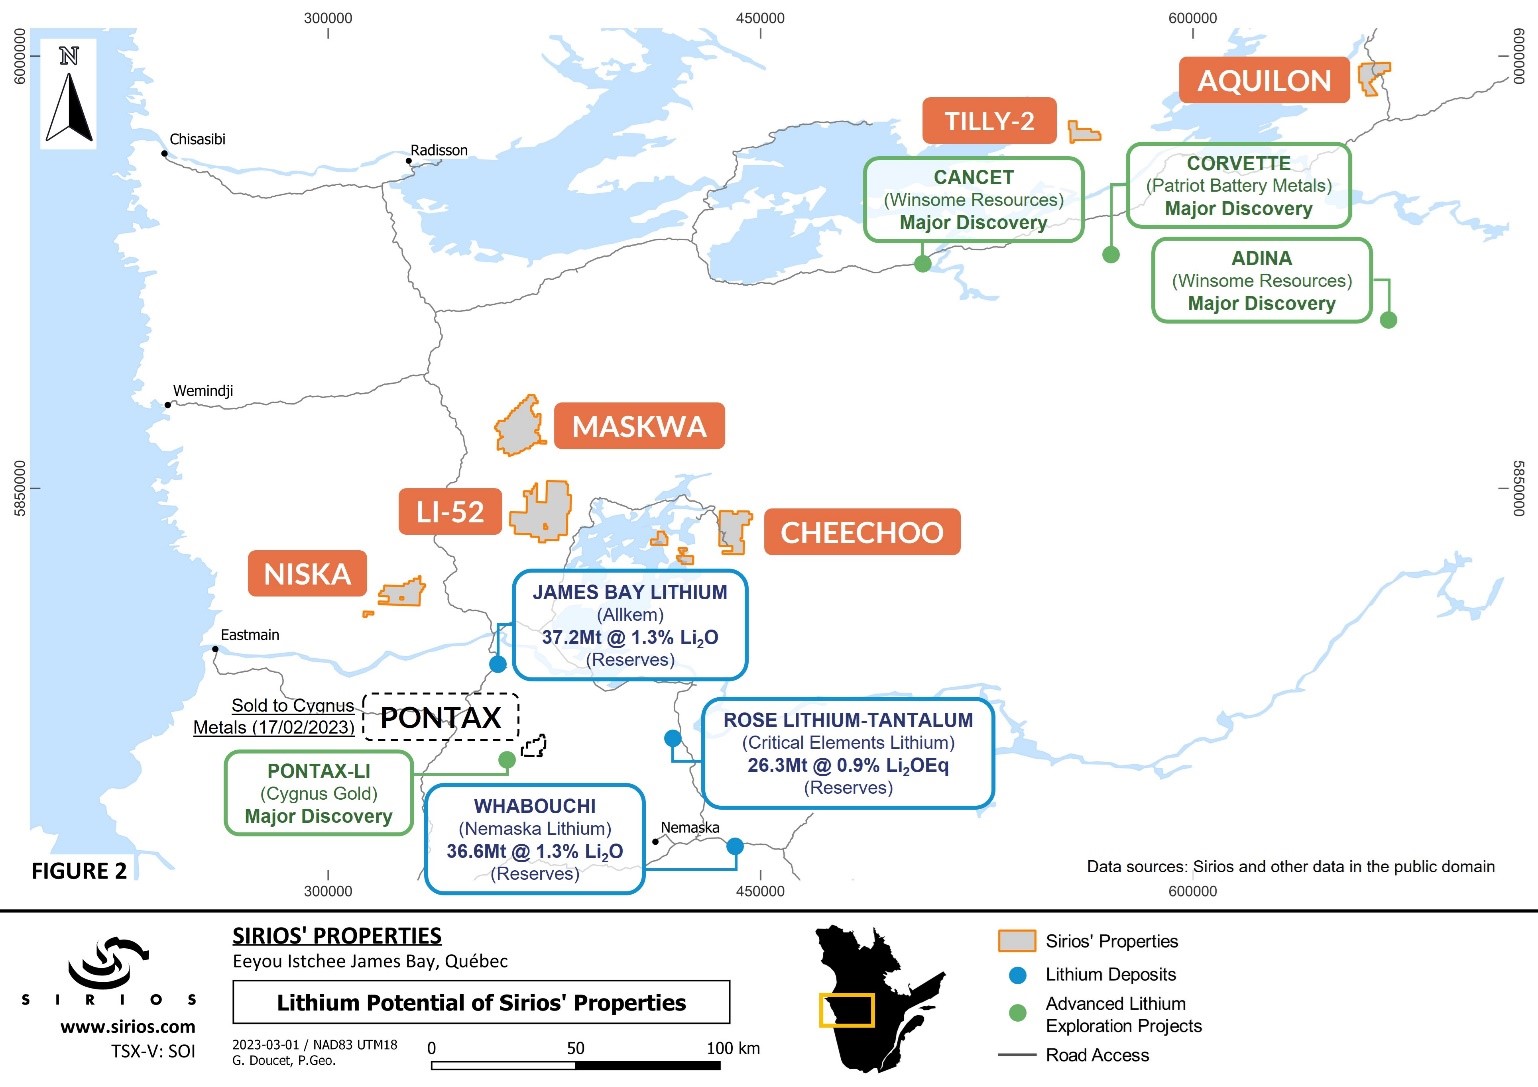 Location of Sirios’ projects in relation to lithium deposits and discoveries.